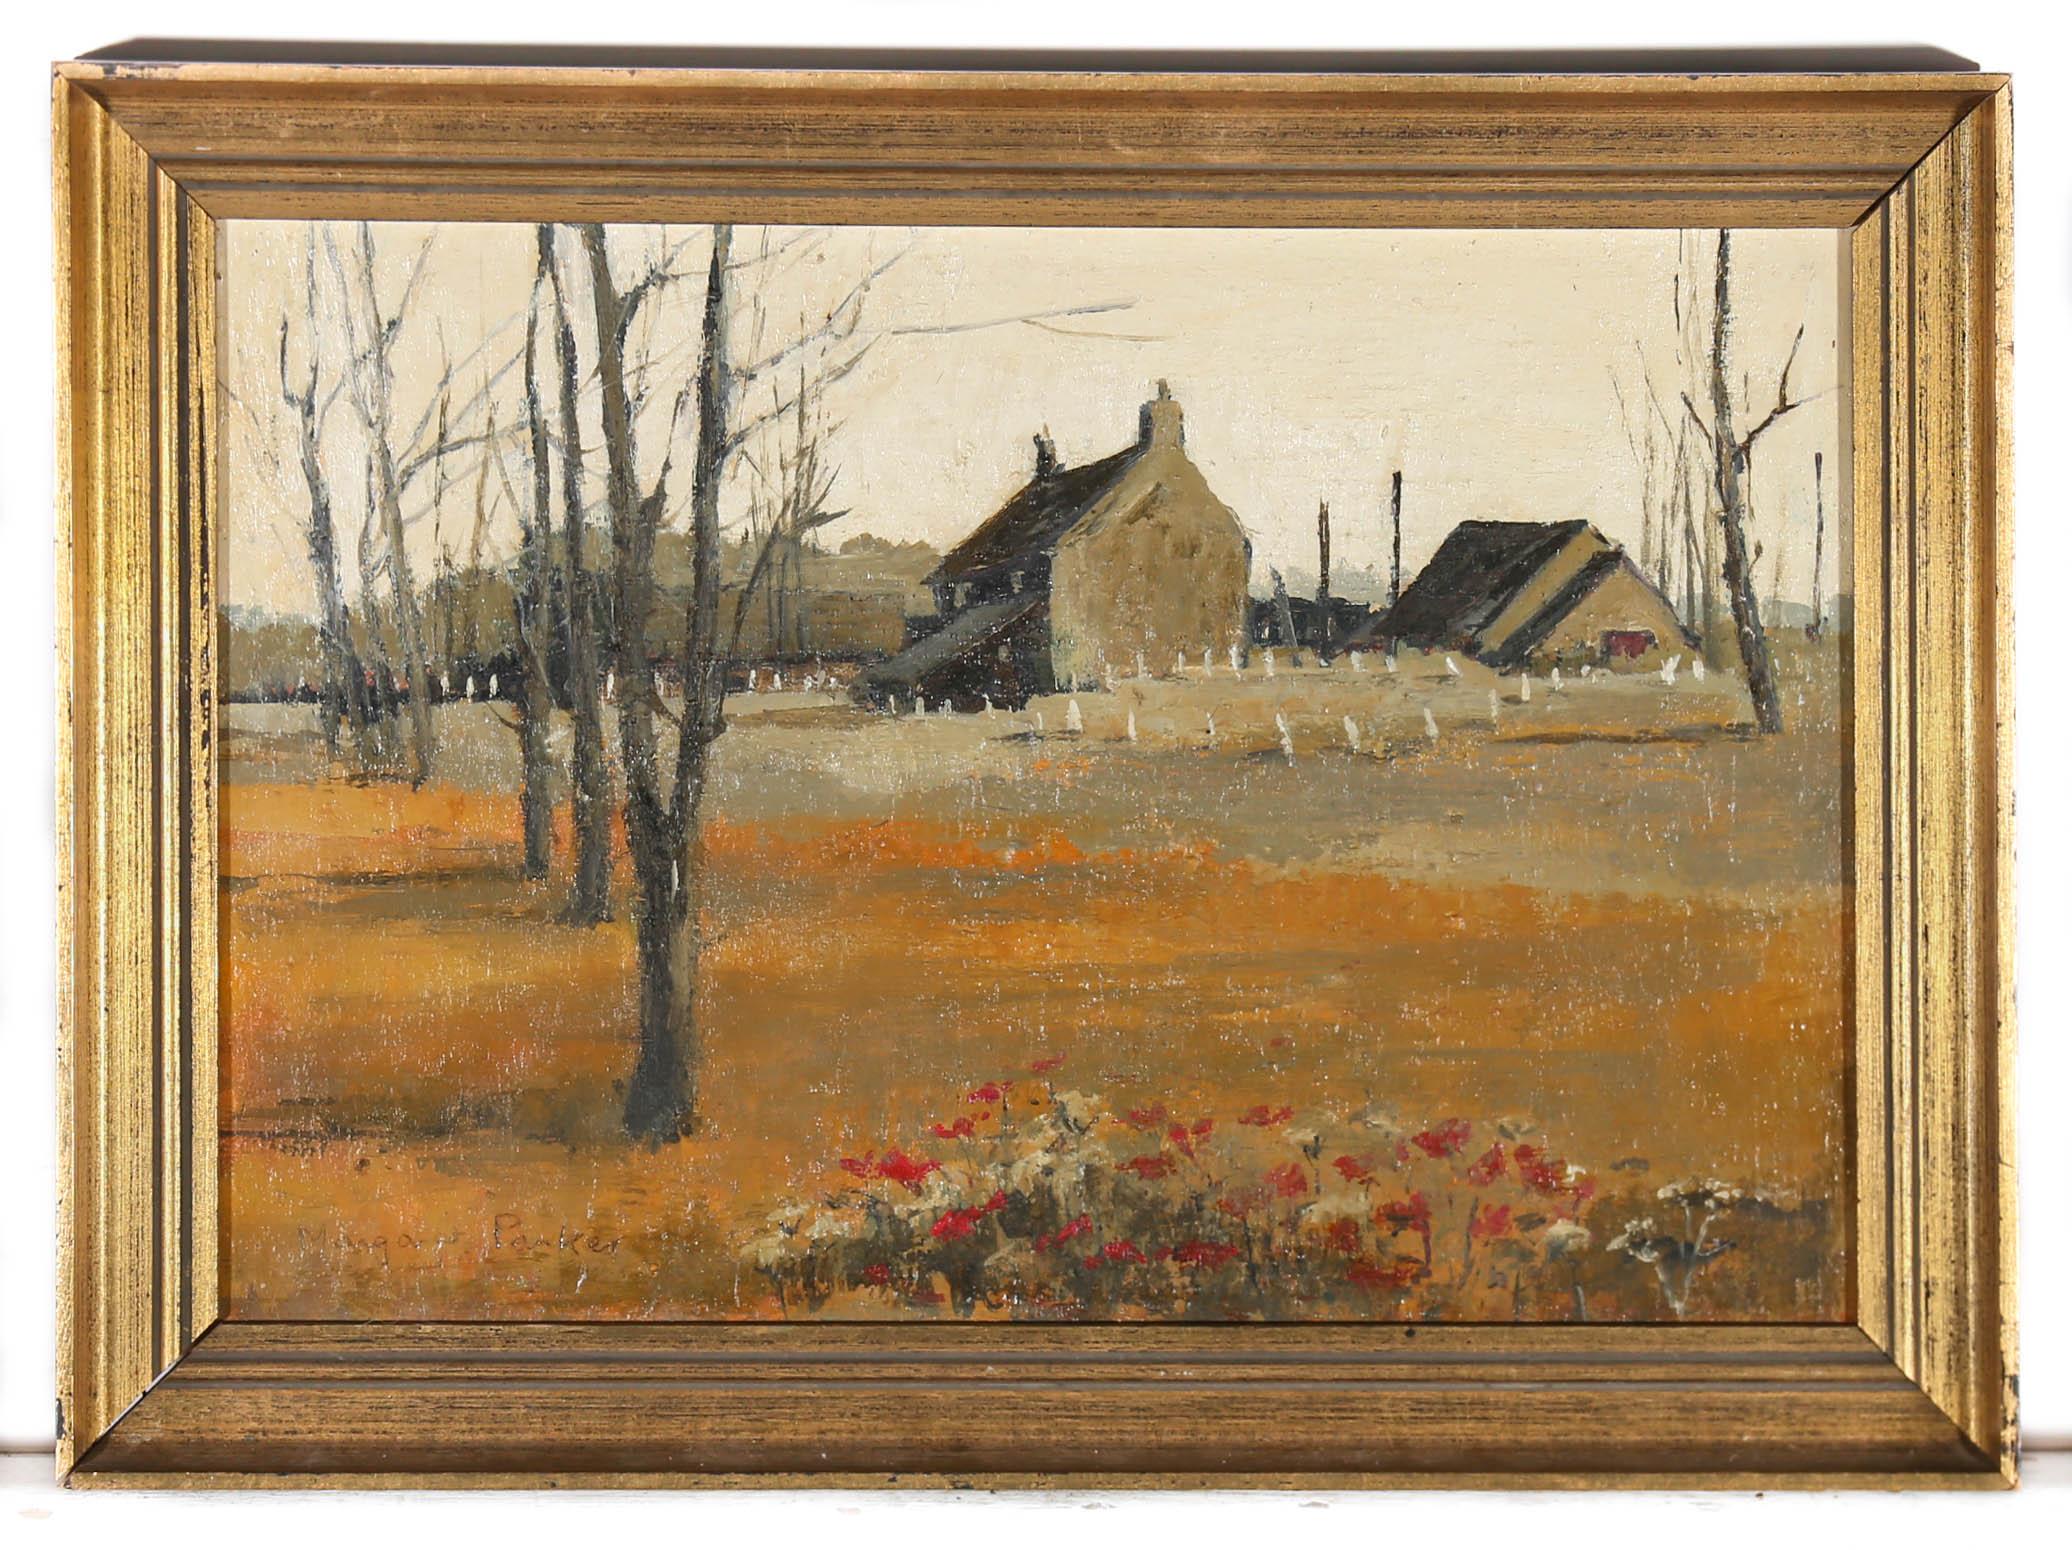 A charming depiction of a rural farmstead in a landscape. The scene shows bare winter trees before a quaint farm cottage, painting in an earthy palette. Signed to the lower right. Presented in a gilt frame. On board. 